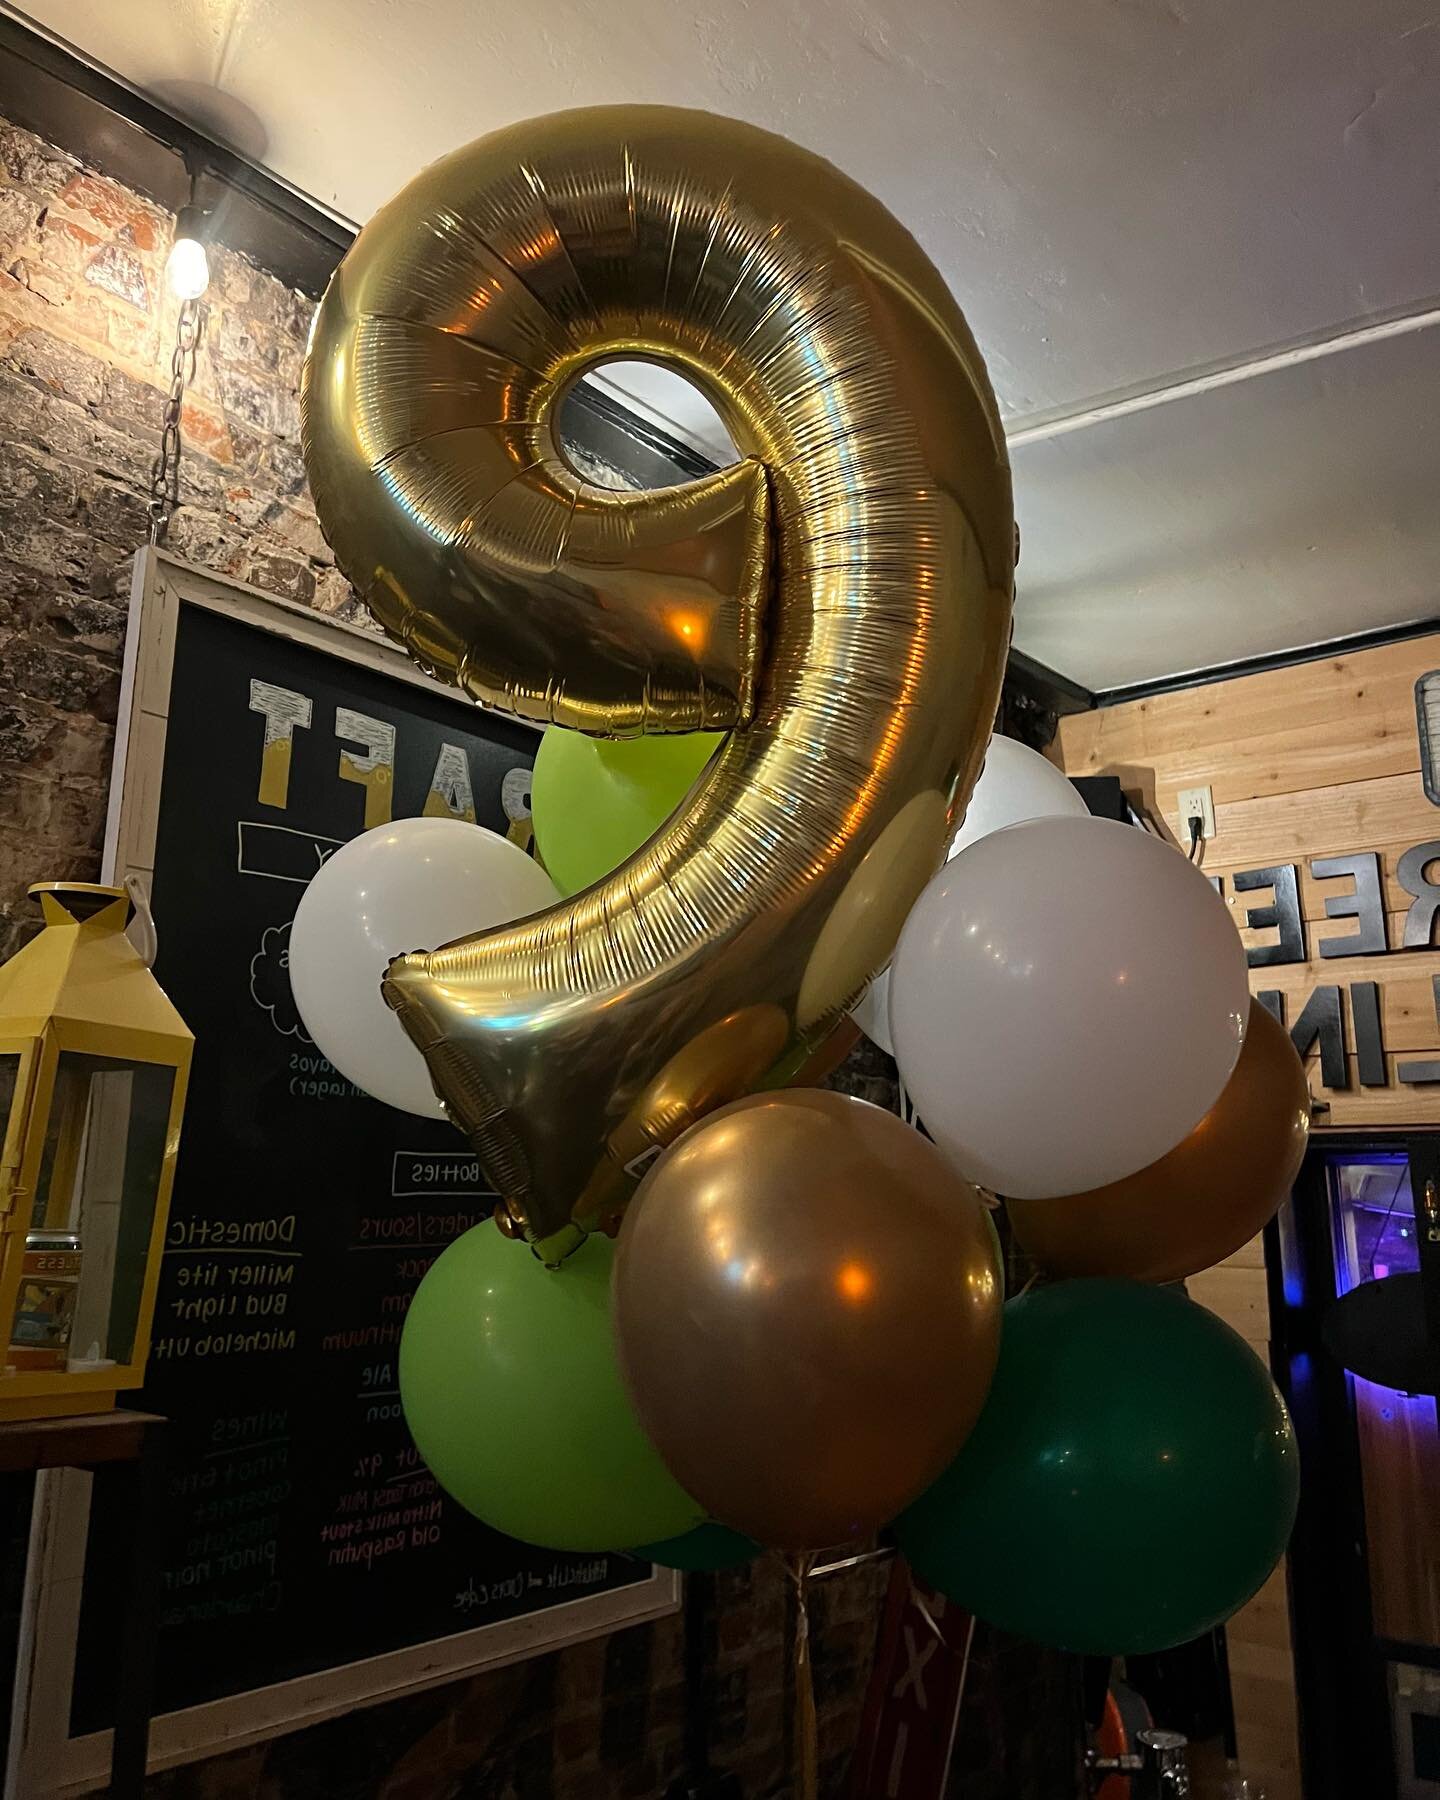 Green Line turned NINE!🎊🍻 We had so much fun at our Anniversary/St. Paddy&rsquo;s celebration with y&rsquo;all.🍀 Huge shoutout to our incredibly talented friend @scott_puckett76 for hosting an amazing night!🤩 We love y&rsquo;all! #GREENLINEBREWER